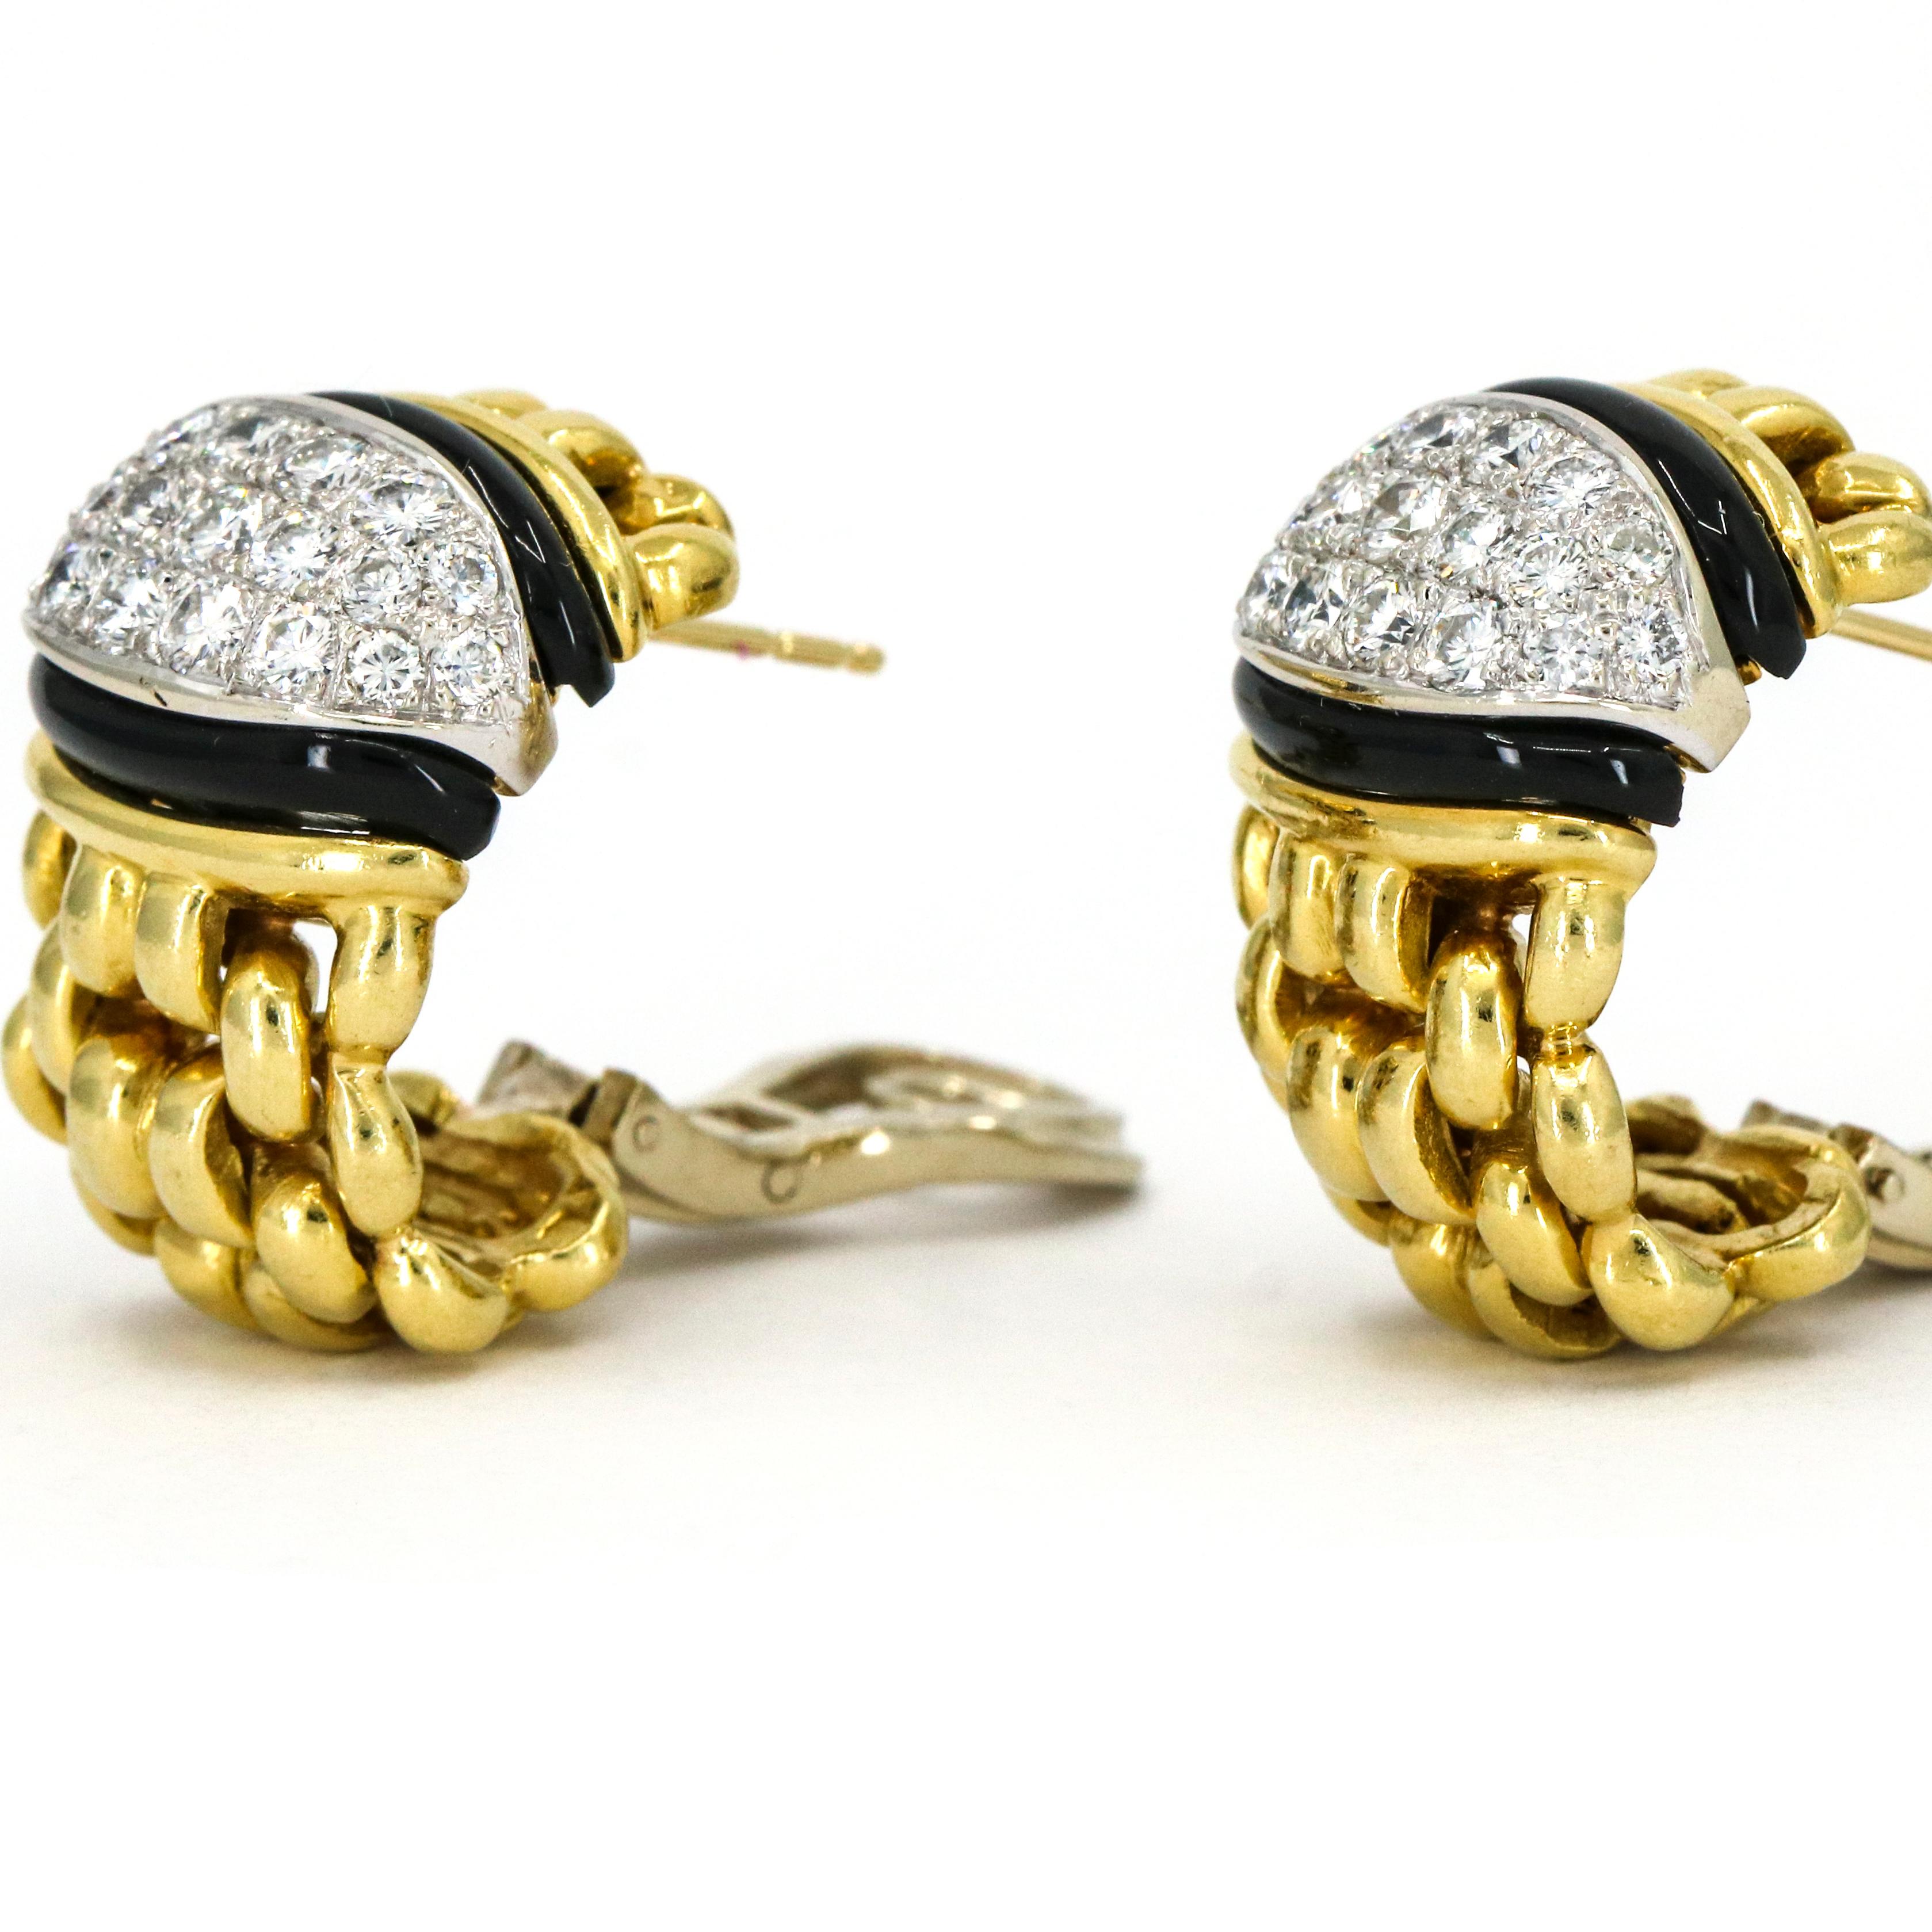 1.25 Carat 18 Karat Yellow Gold Onyx Diamond Earrings In Good Condition For Sale In Fort Lauderdale, FL